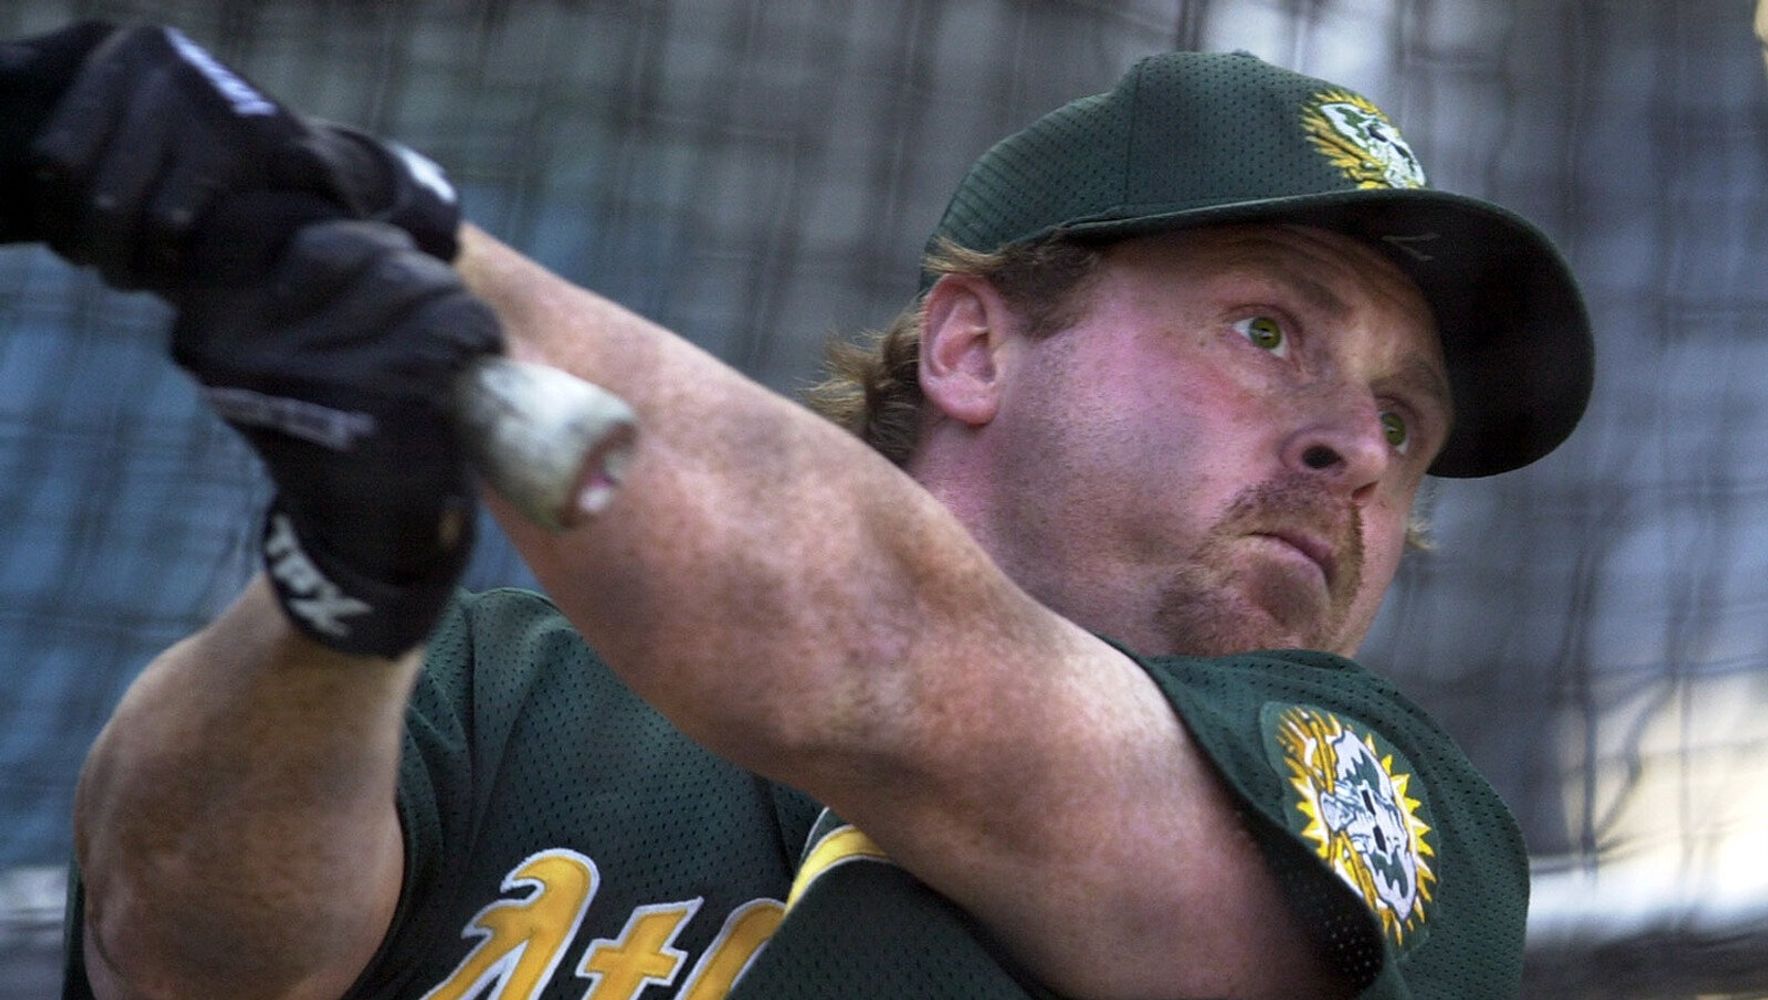 Jeremy Giambi, a former MLB player who spent two and a half